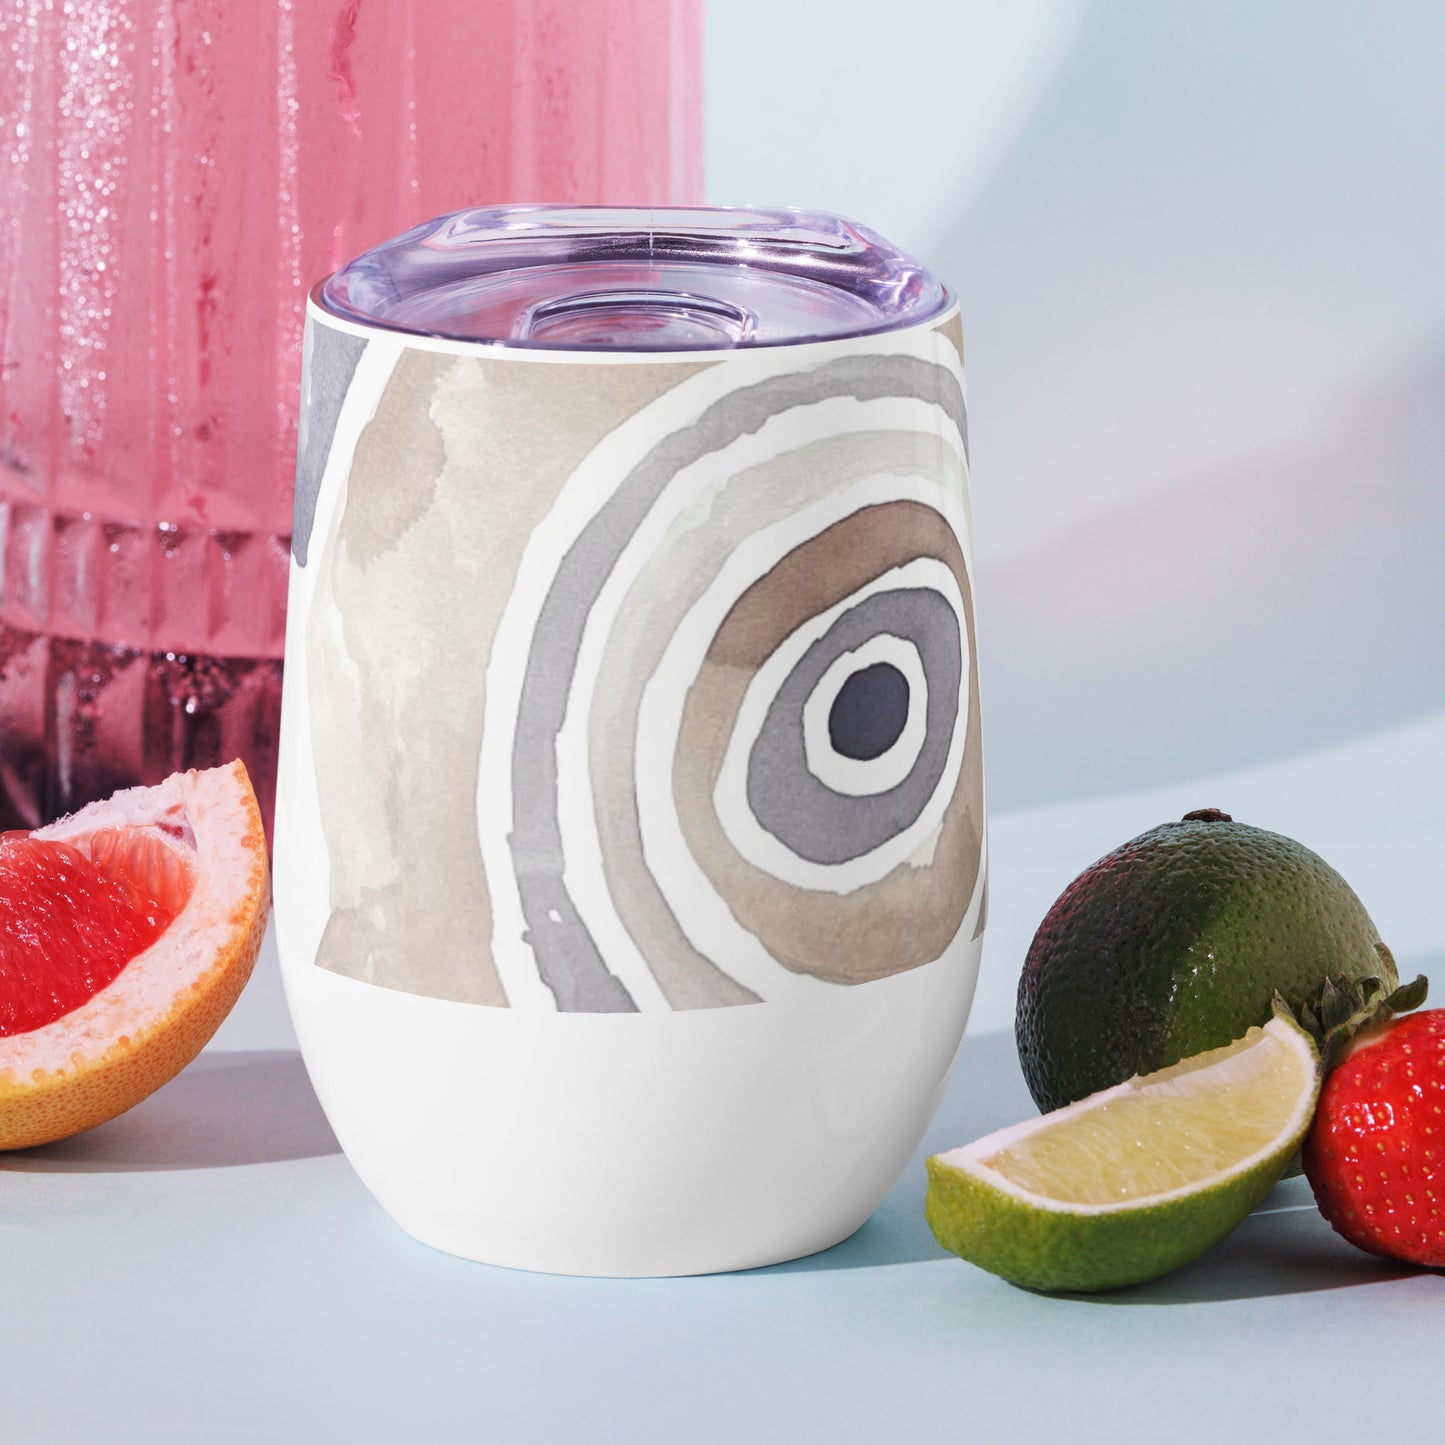 Body of Wine Collection: French SwirlWine tumbler